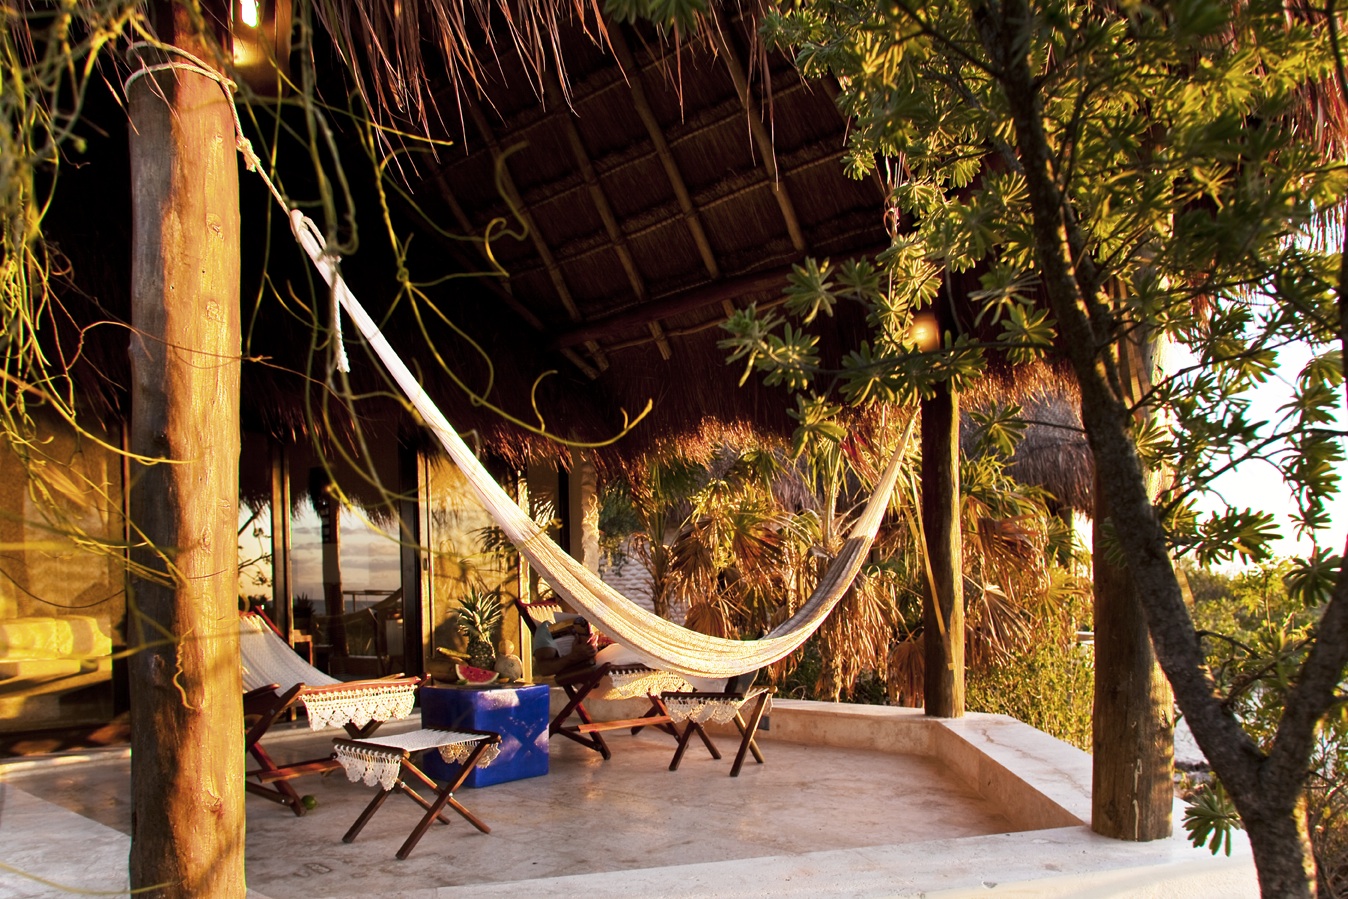 The perfect place for a hammock siesta - your bungalow